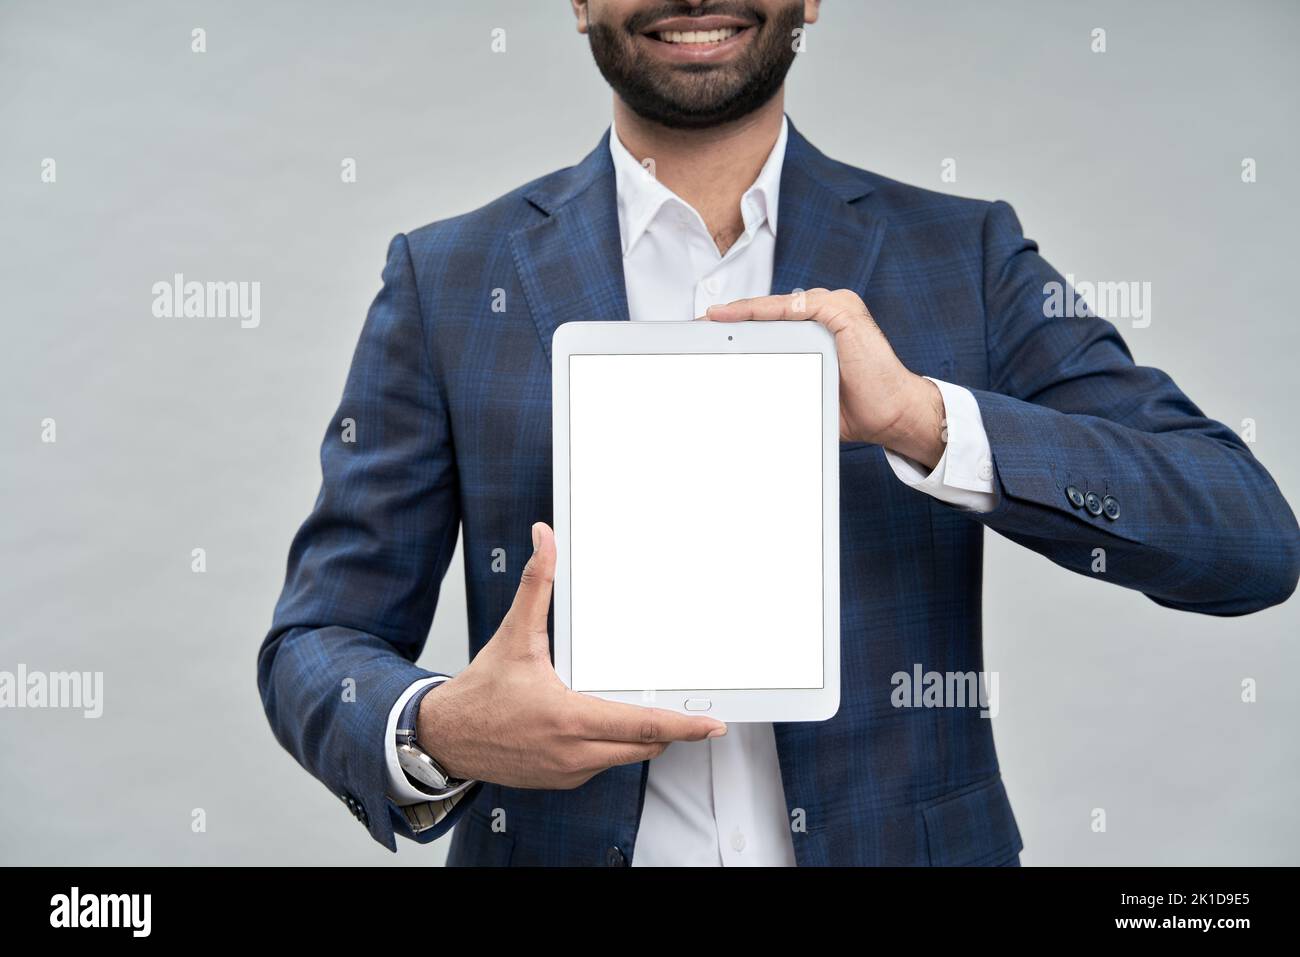 Smiling business man manager wearing suit showing digital tablet mockup. Stock Photo